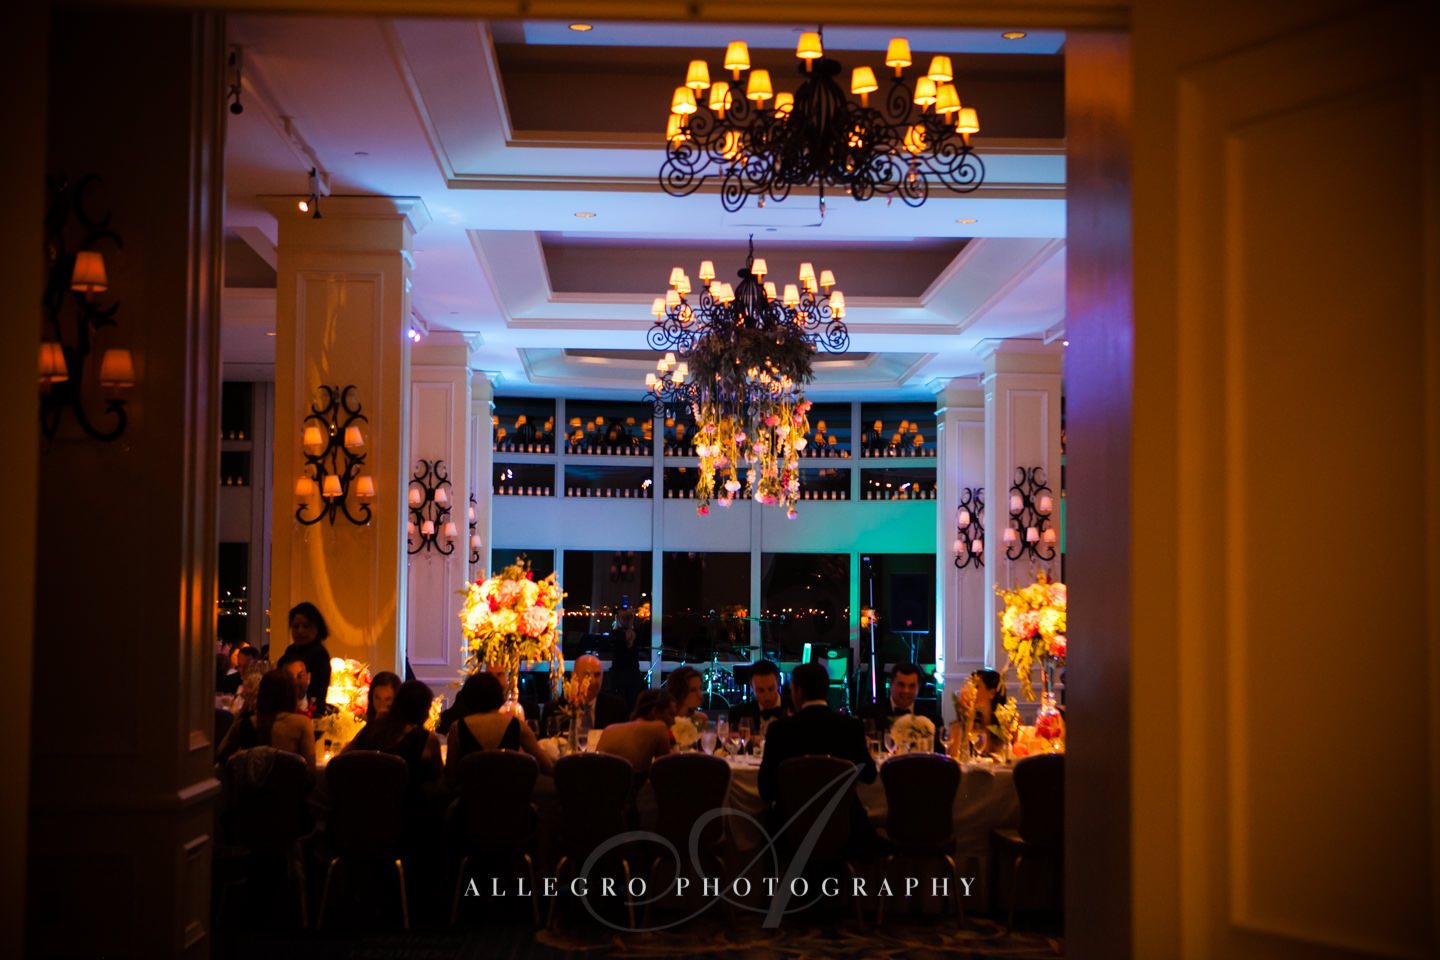 wharf room at night with uplighting- photo by allegro photography